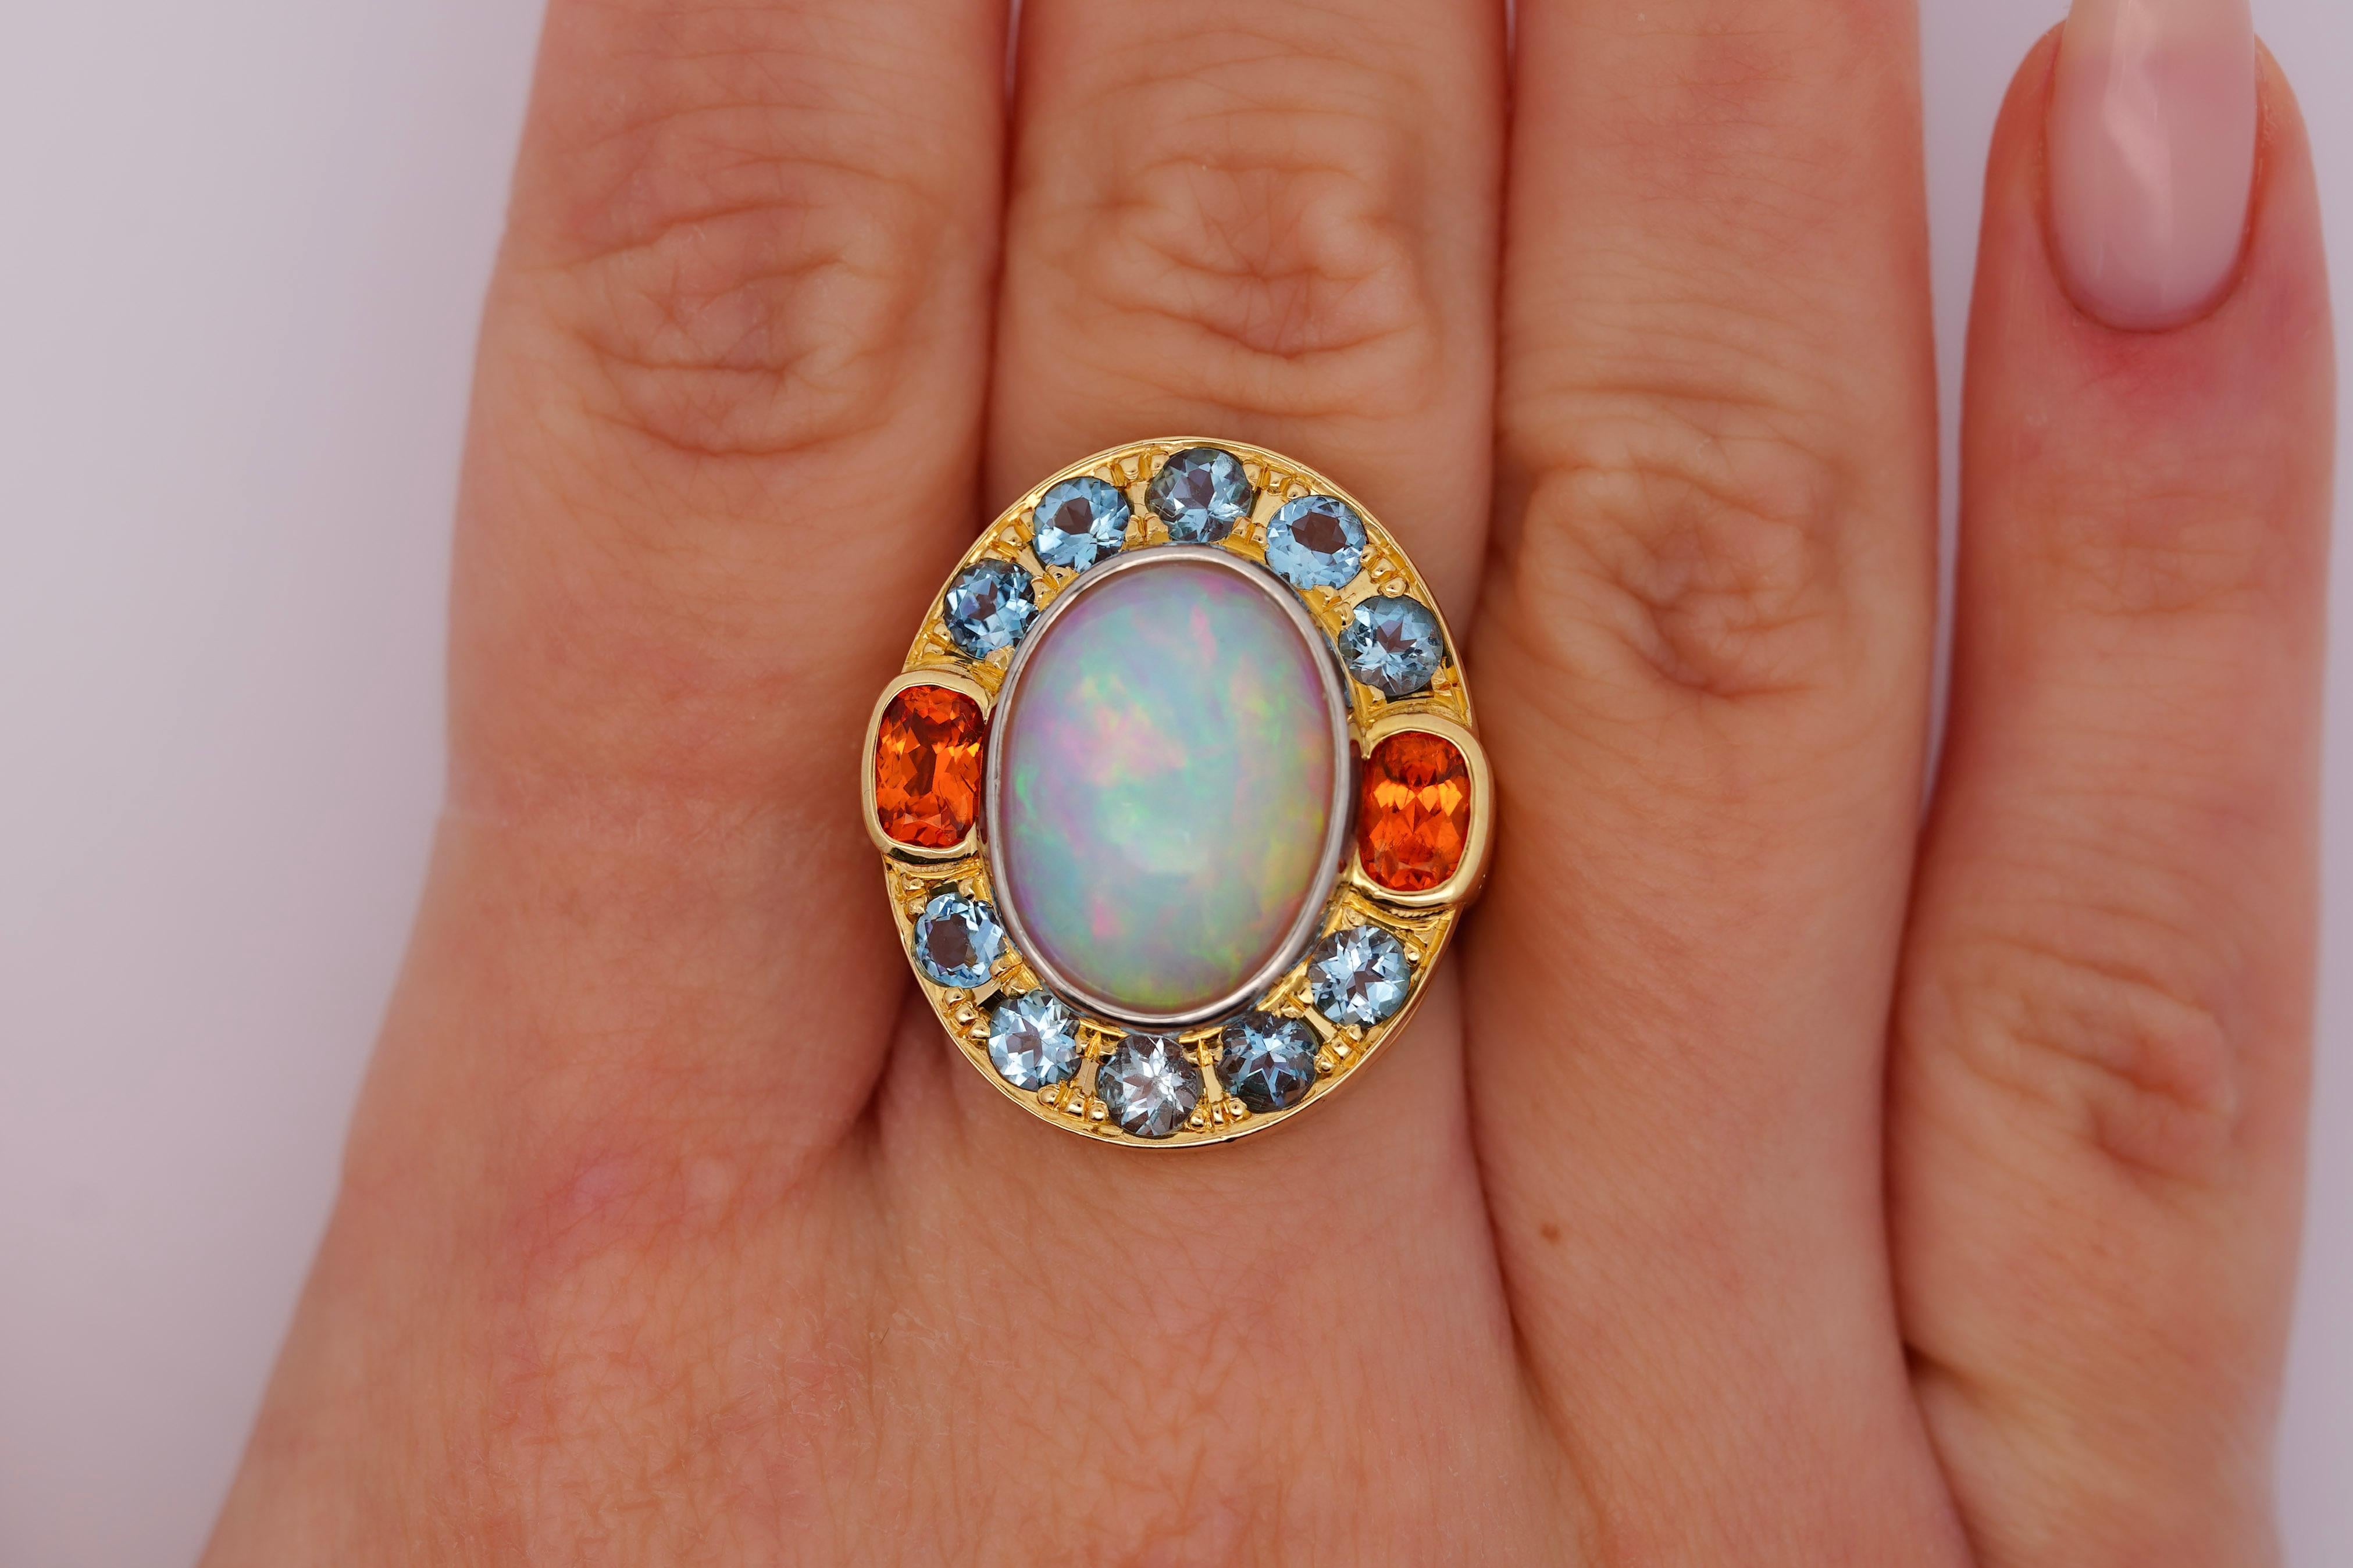 Cabochon GIA Certified 8 Carat White Opal With Orange Garnet & Aquamarine Halo Ring For Sale